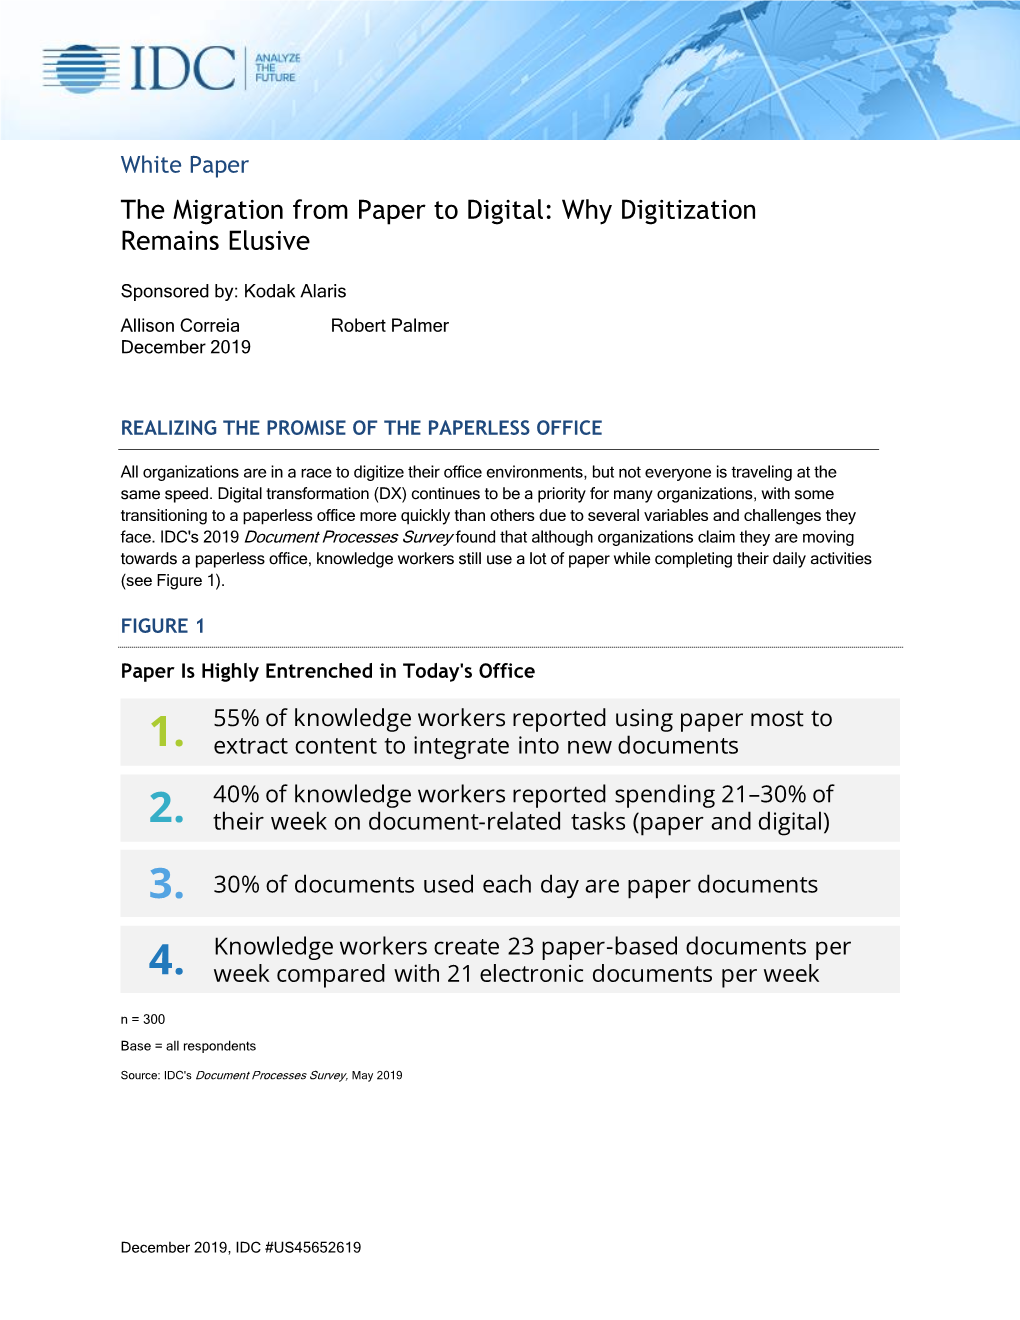 The Migration from Paper to Digital: Why Digitization Remains Elusive